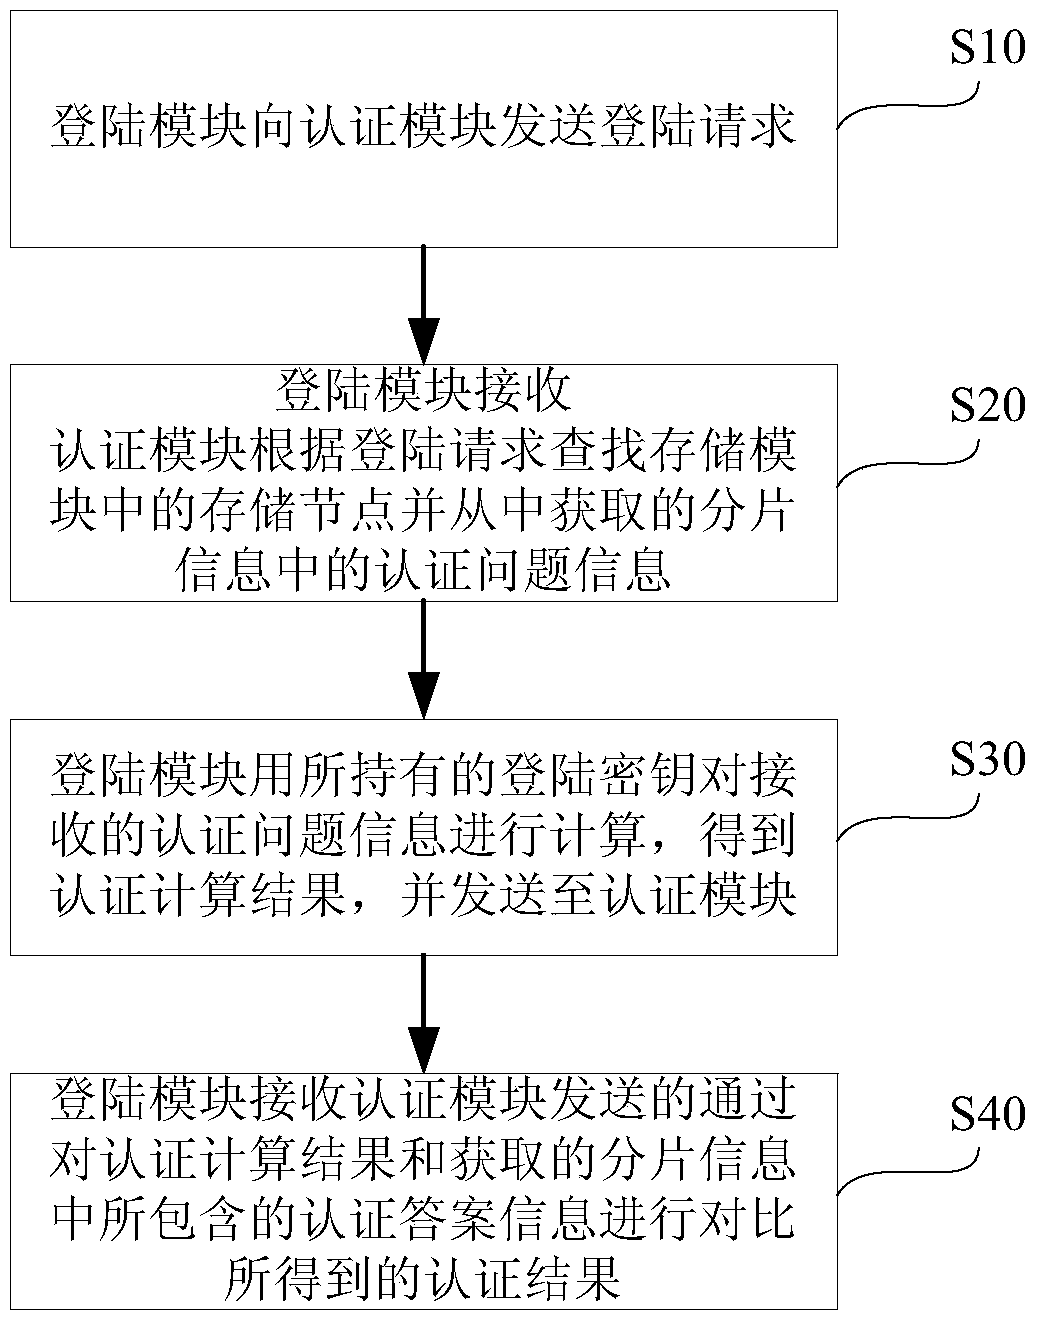 Authentication System for Distributed Storage